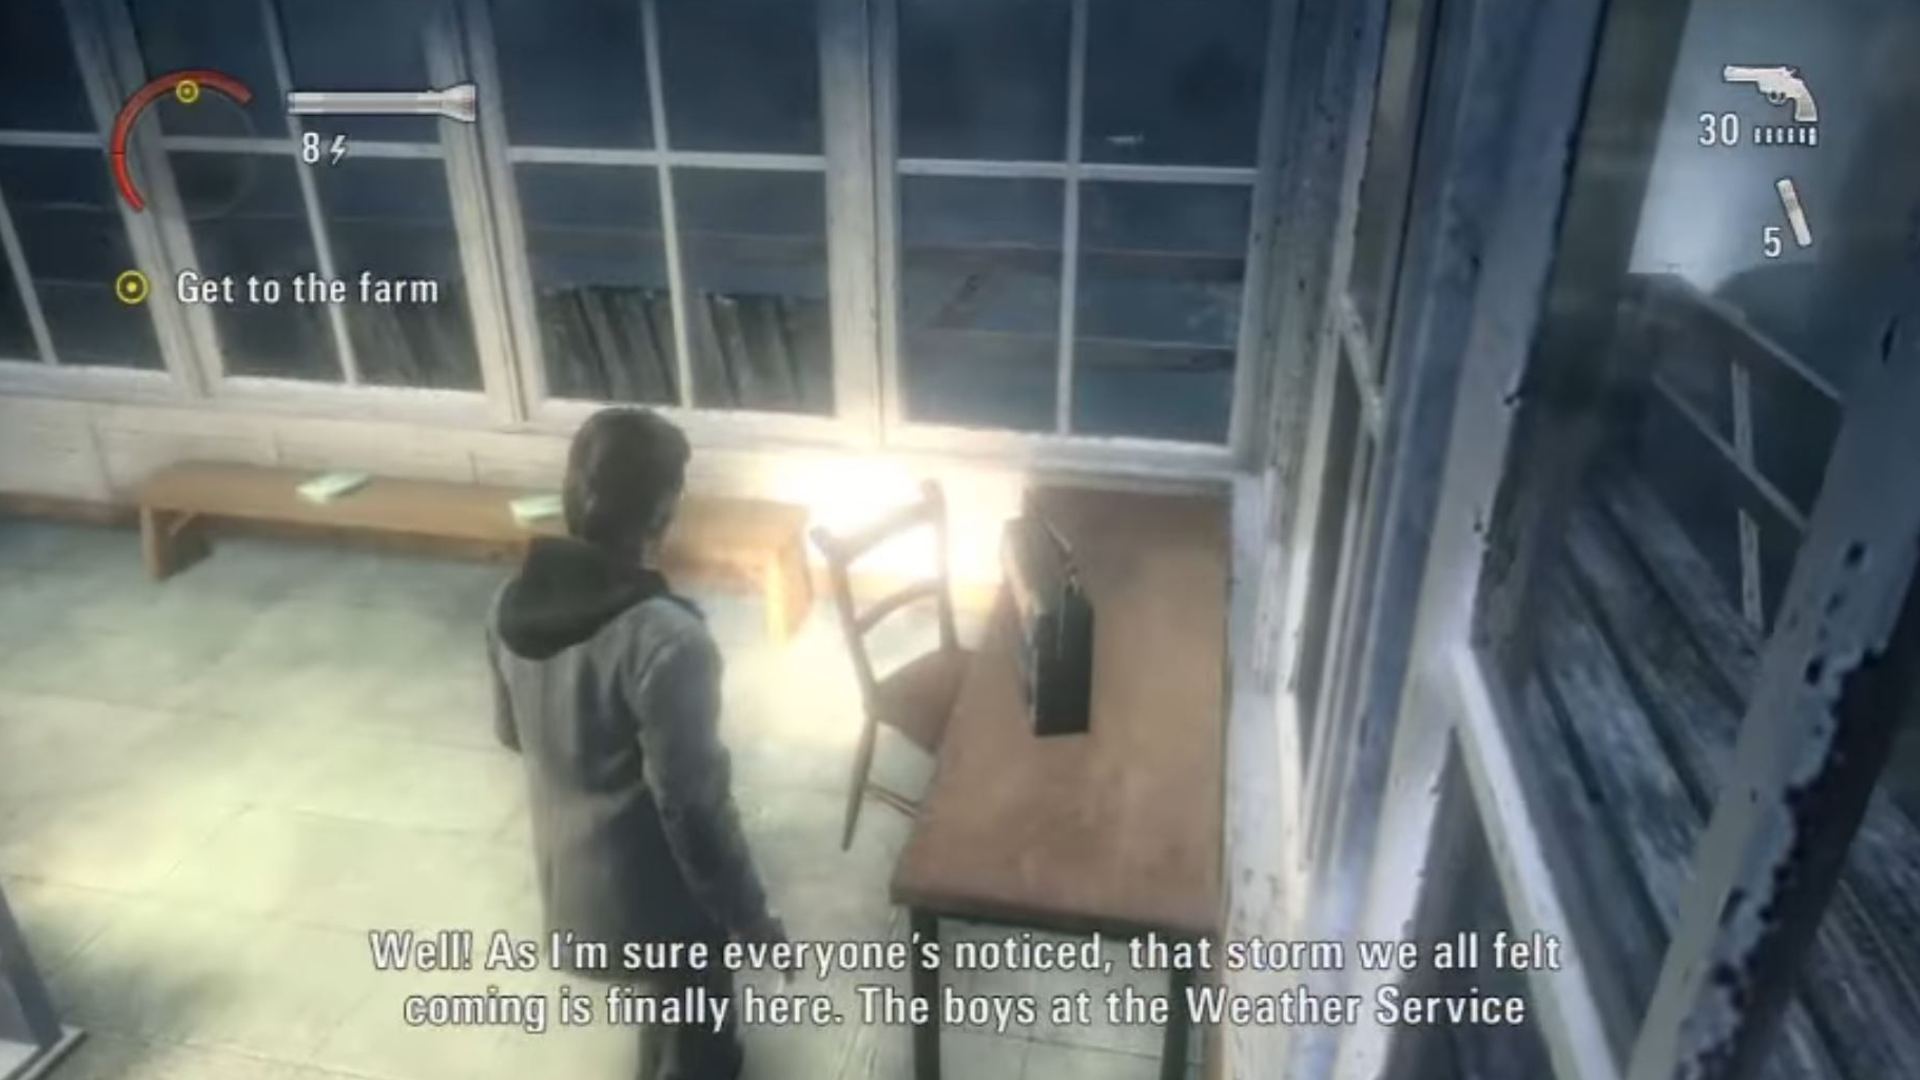 Alan Wake Remastered radios: Alan is looking at the radio sat on the table in the watchtower.